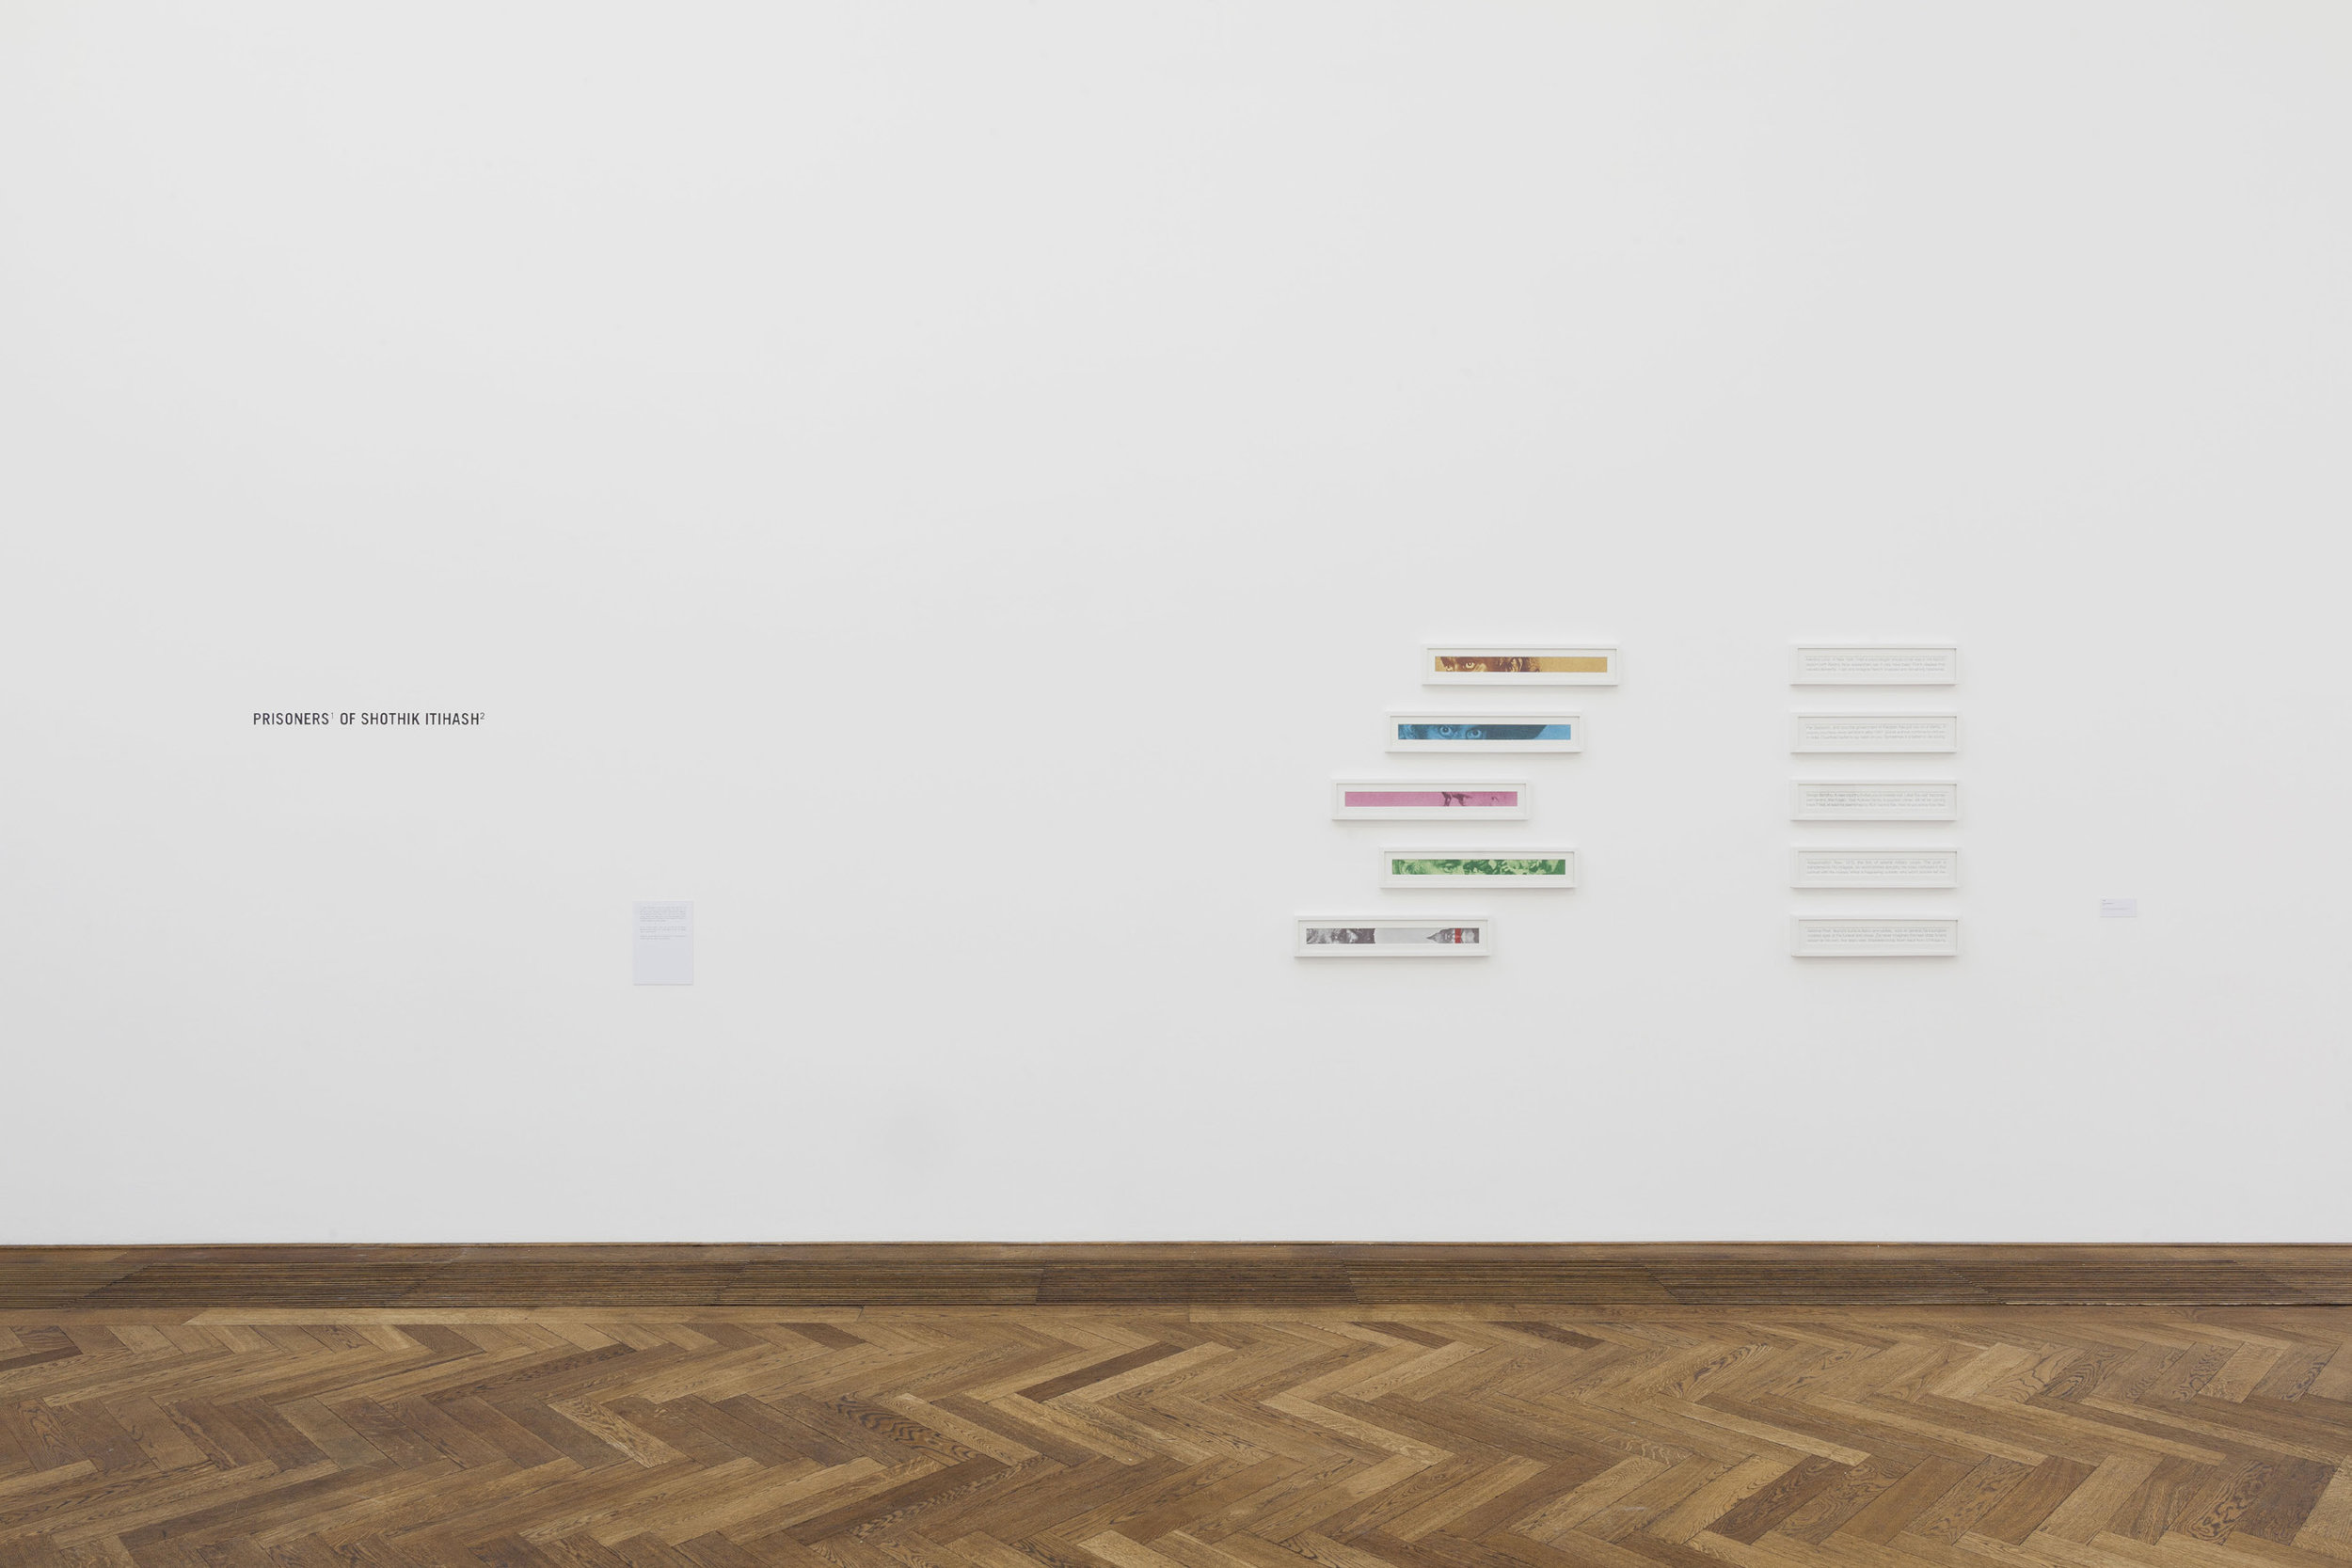  Installation view, Kunsthalle Basel. Five room survey show, curated by Adam Szymczyk. 